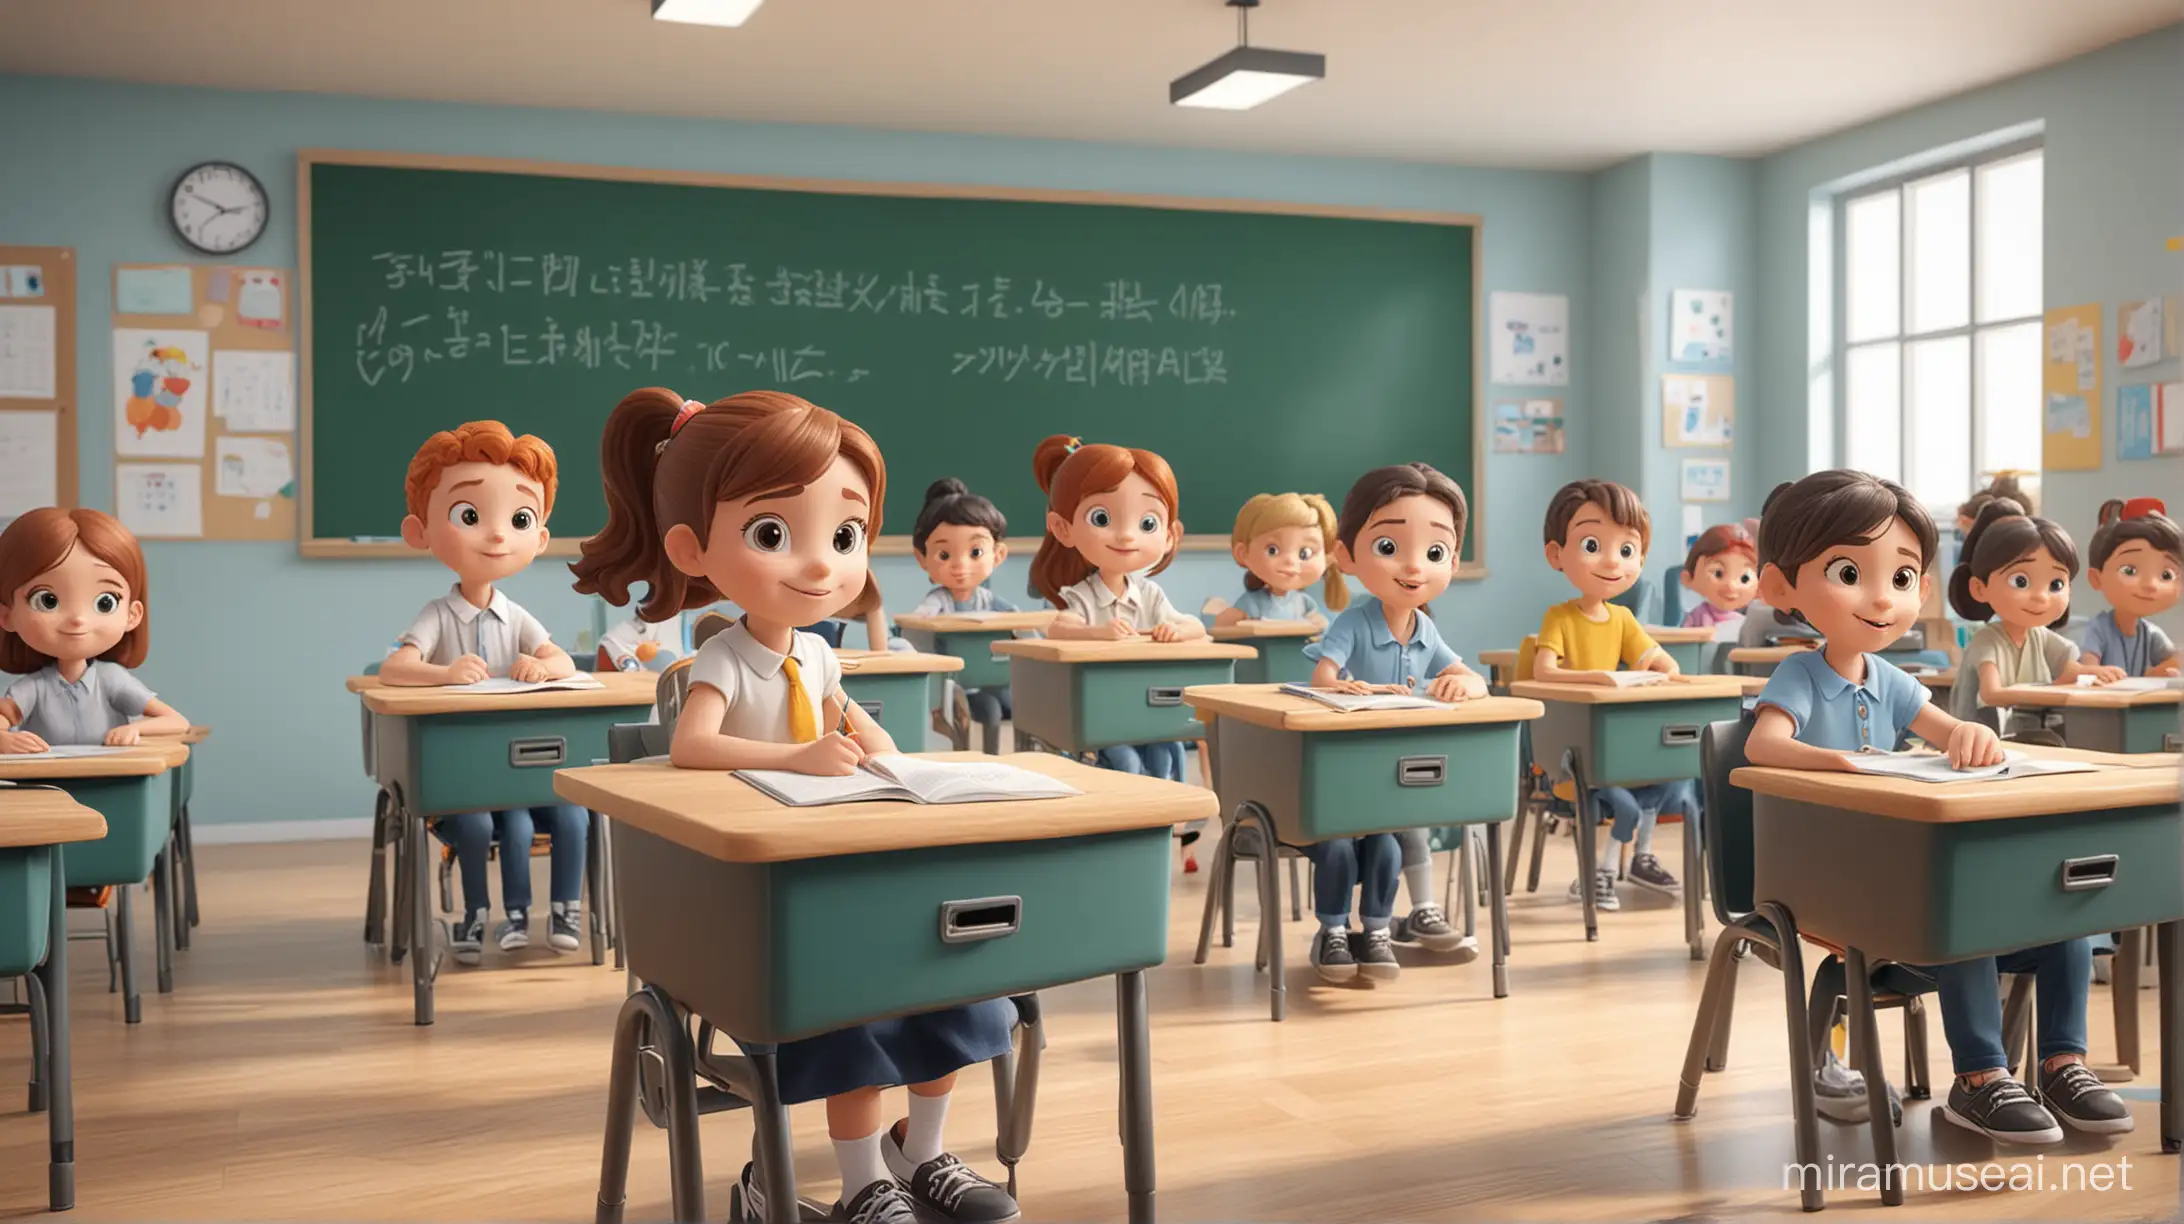 3D Cartoon Classroom Scene with Children Playful Learning Environment